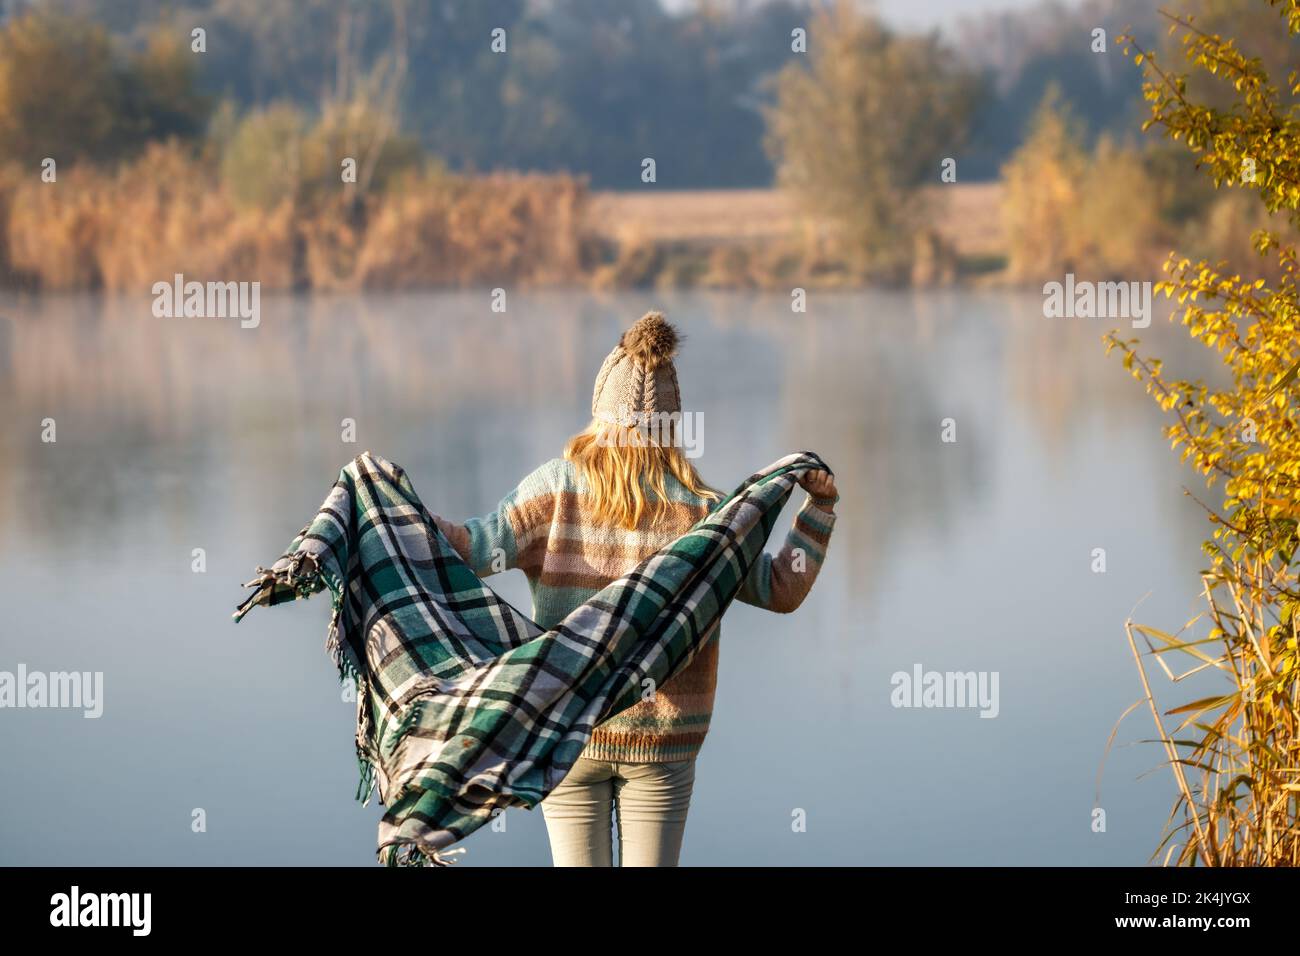 Woman with knit hat is wrapping herself in blanket at lake. Autumn camping in nature Stock Photo